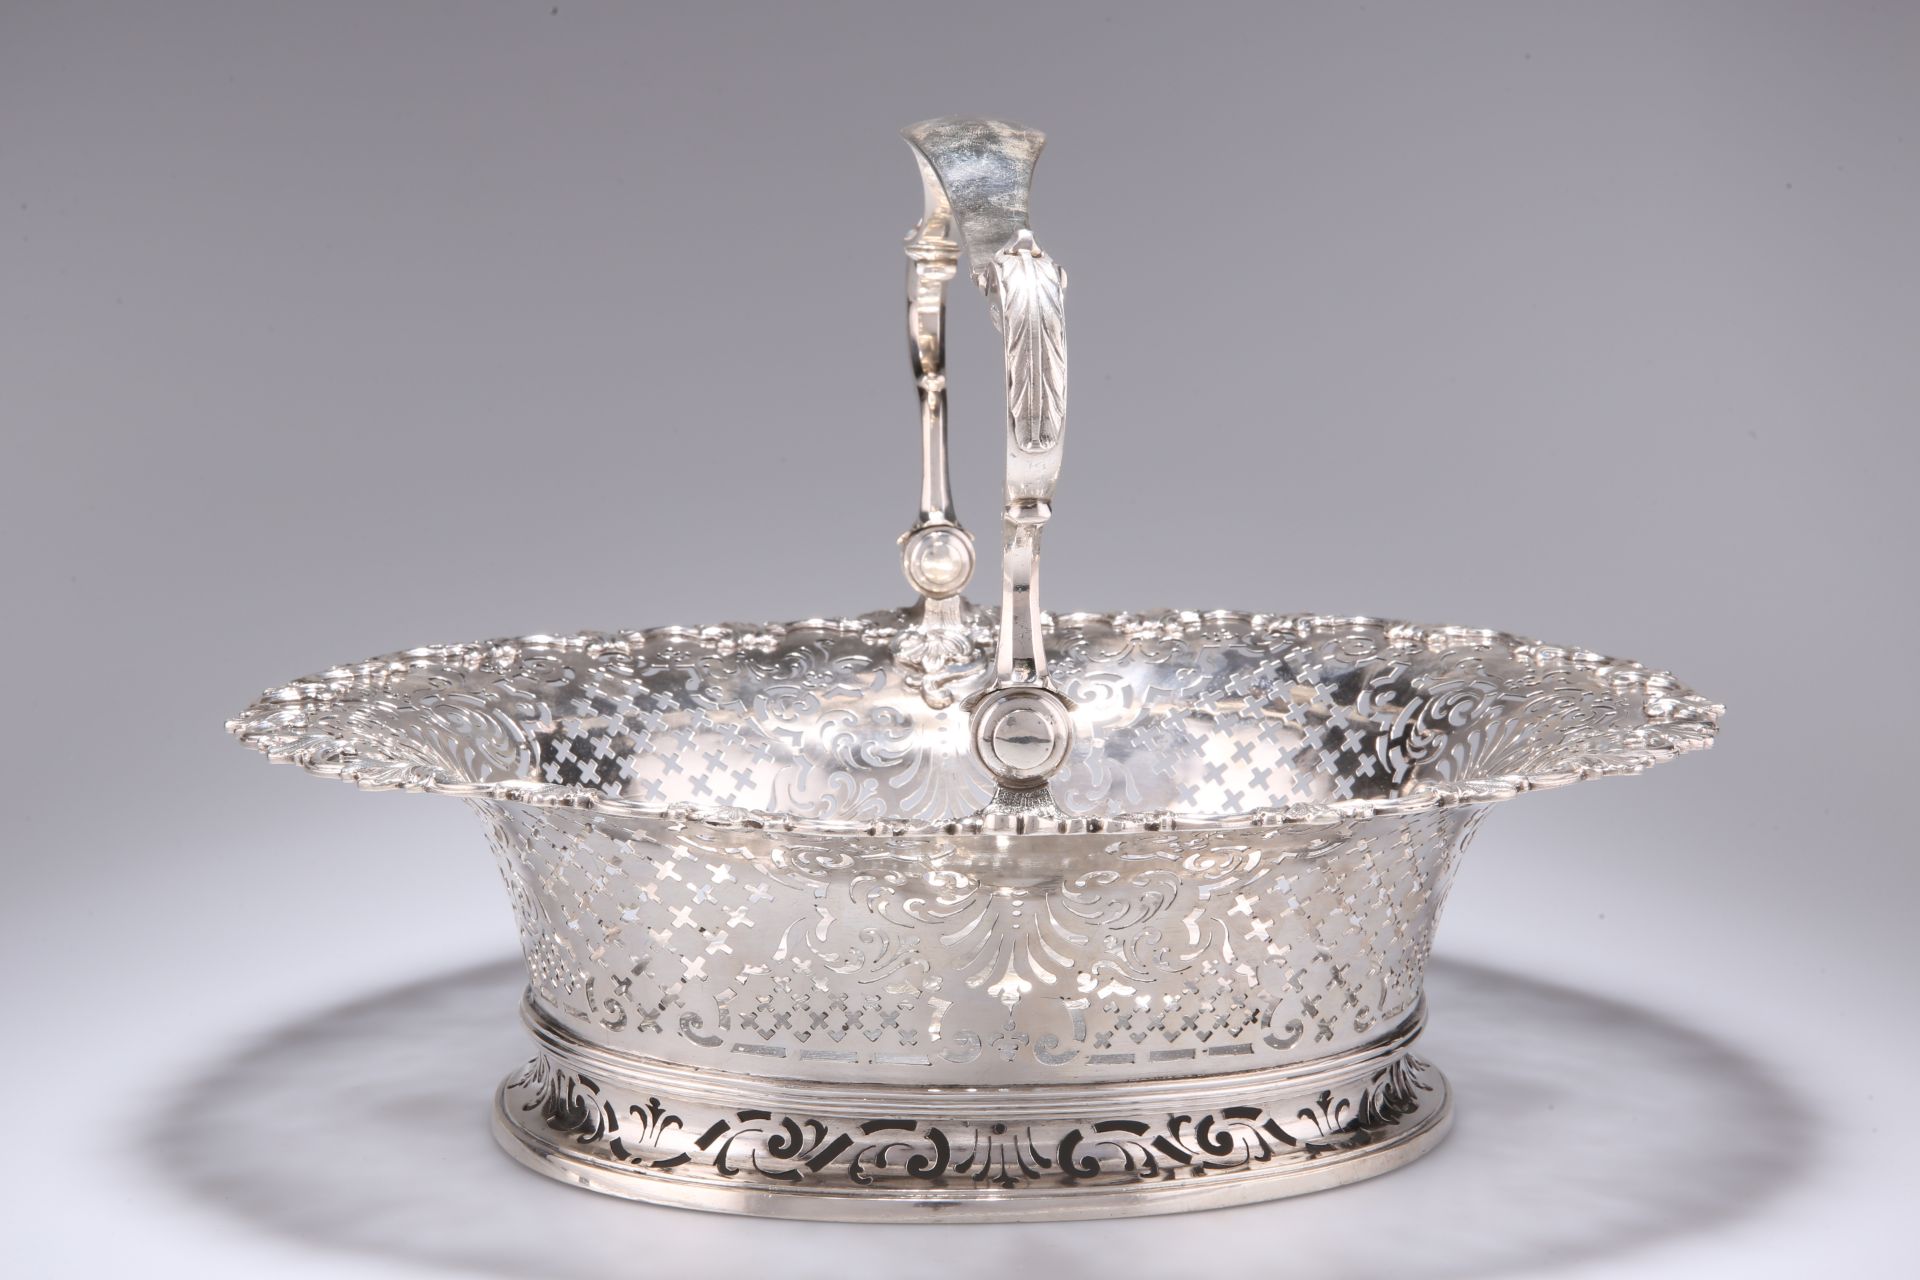 A FINE GEORGE II ROCOCO CAST SILVER SWING-HANDLED CAKE BASKET - Image 3 of 5